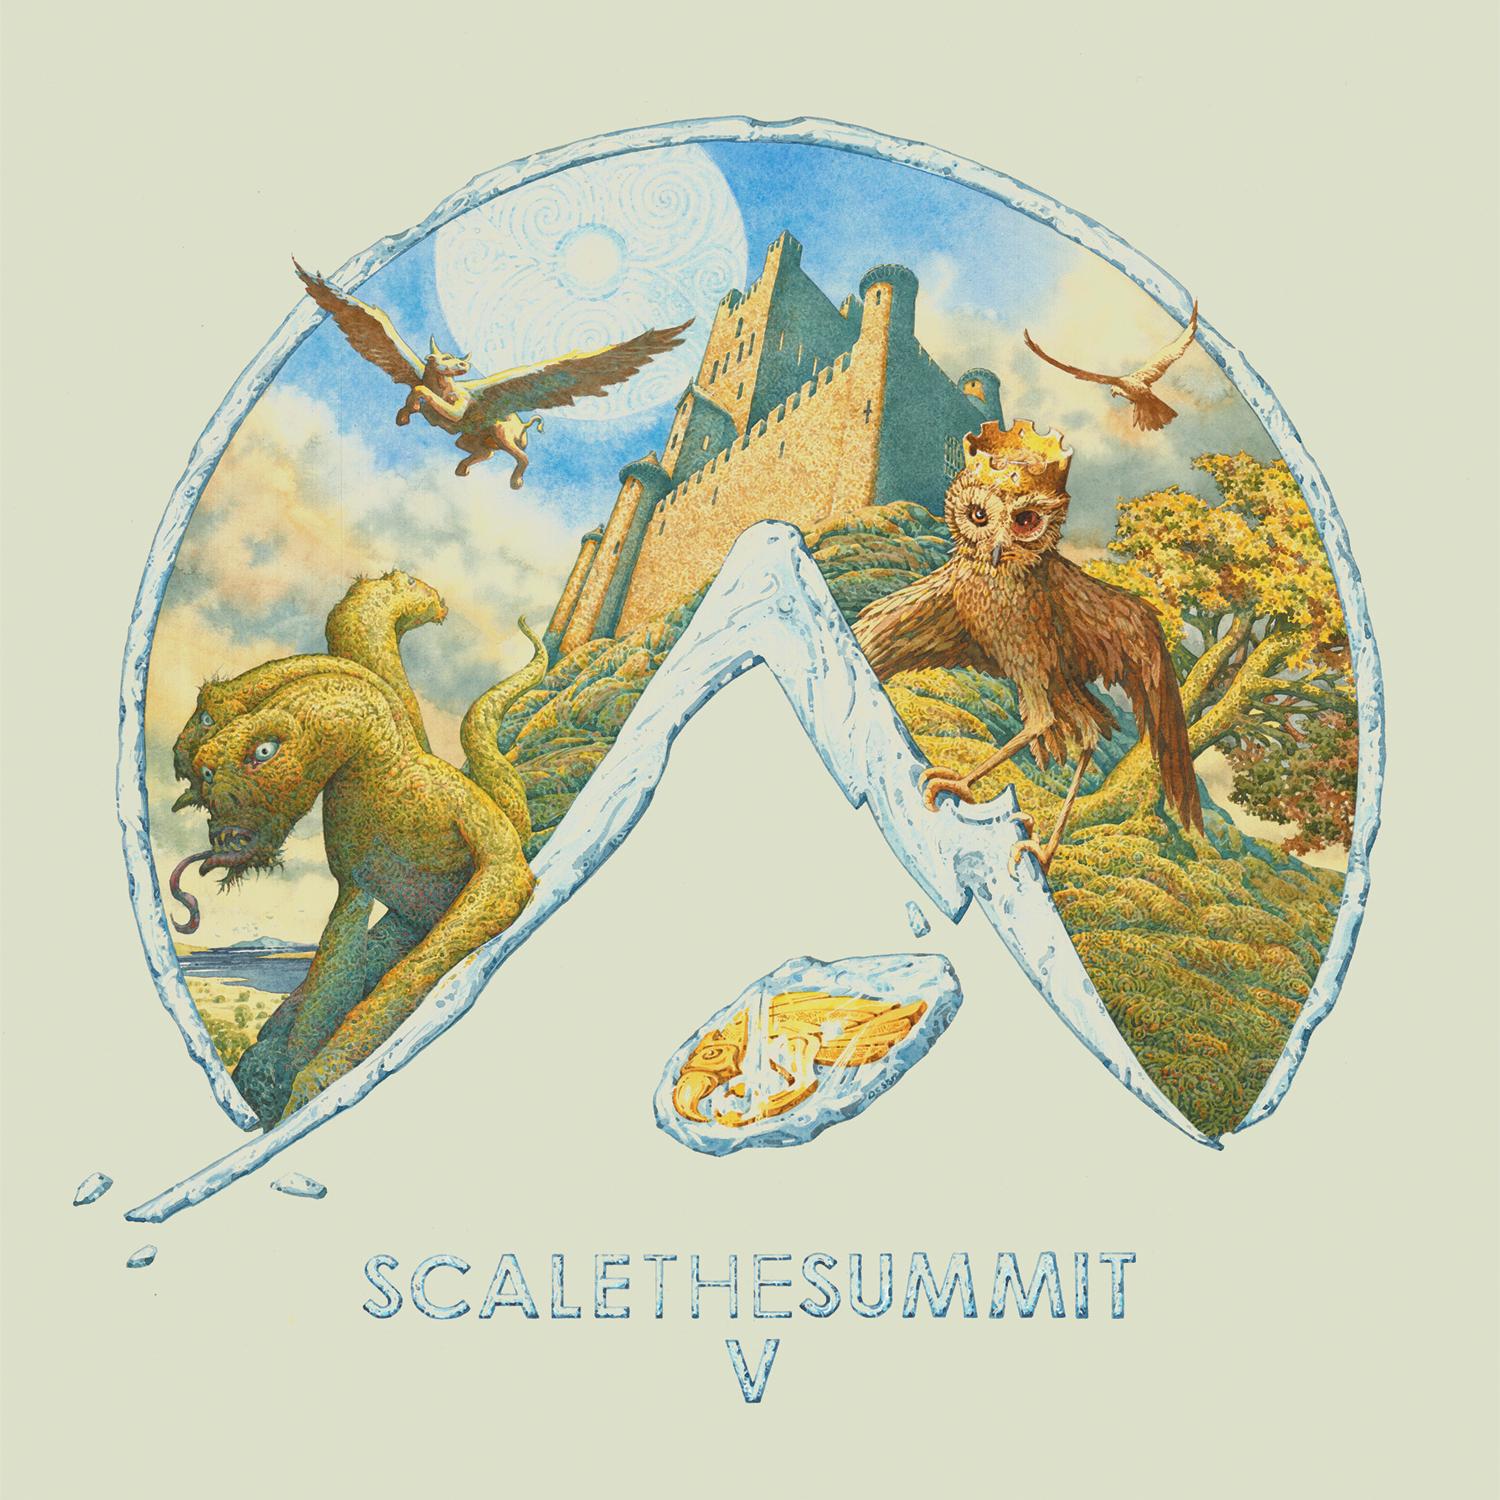 Scale The Summit - Trapped in Ice